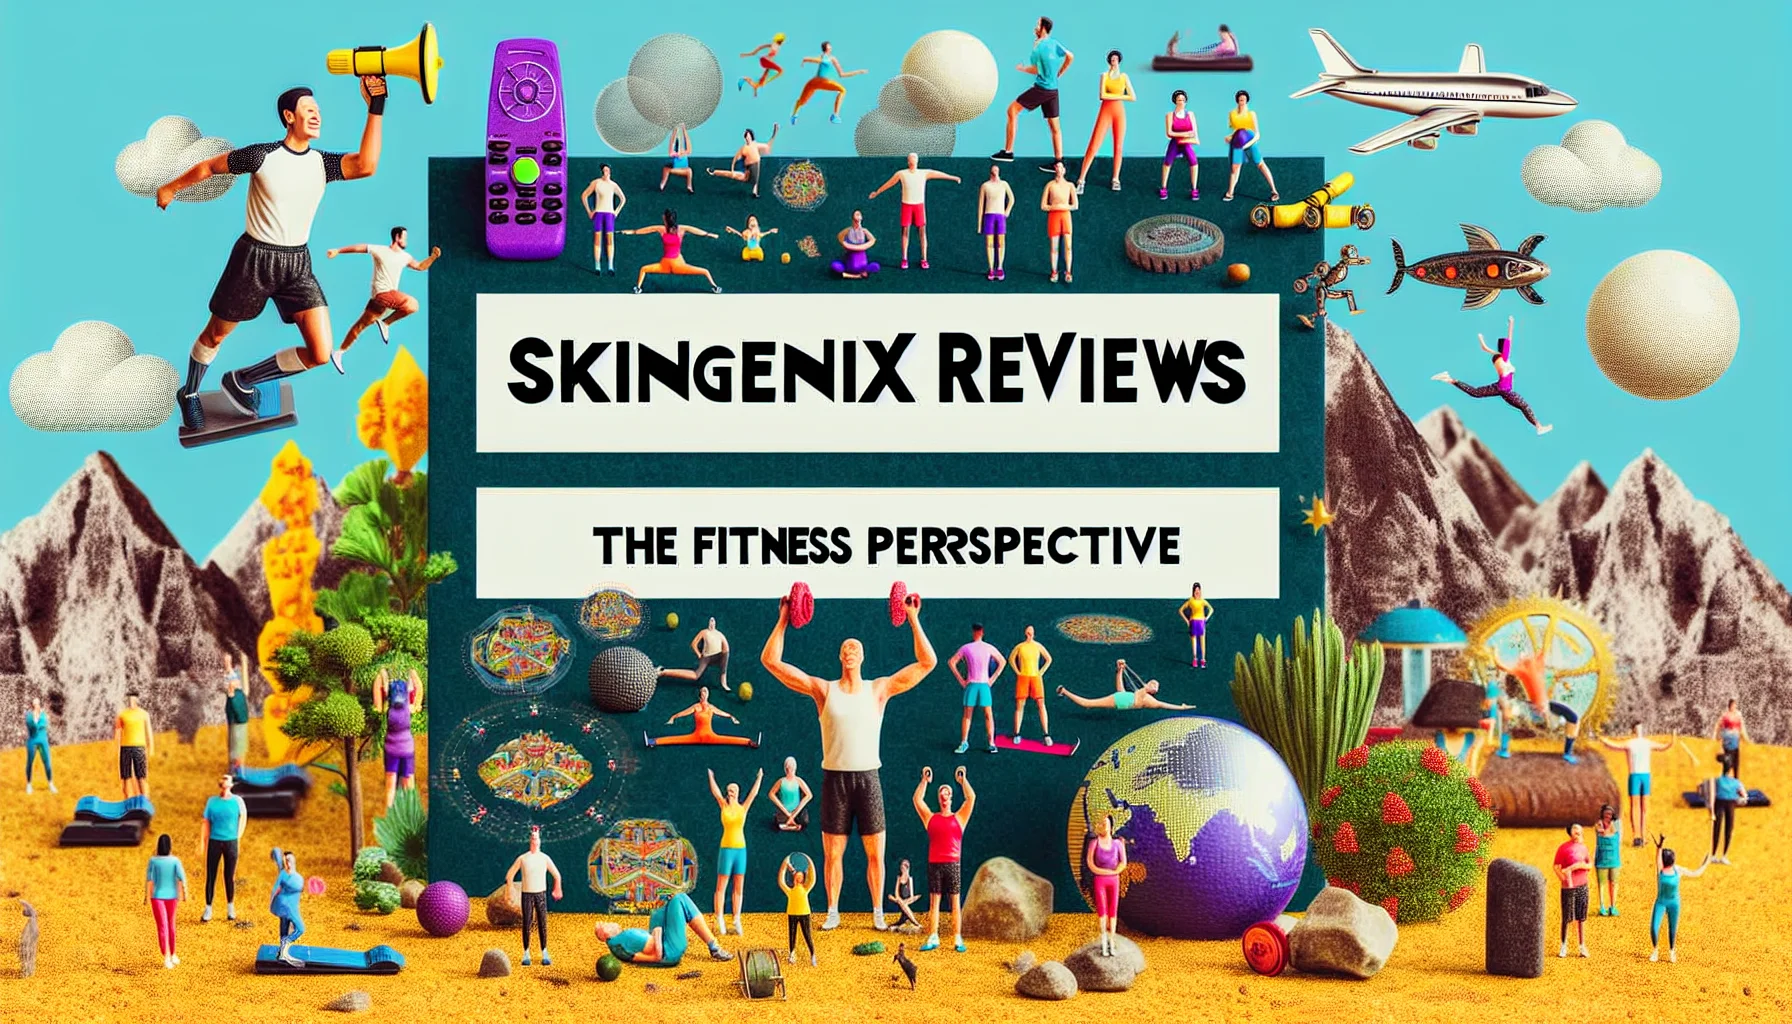 Create a humorous and realistic image that represents viewpoints on fitness and Skingenix. The scene may include exaggerated depictions of people engaging in various fun and enticing exercise routines, with humorous indications of their fitness progress outcomes. The phrase 'Skingenix Reviews: The Fitness Perspective' is prominently displayed in a playful but noticeable font.